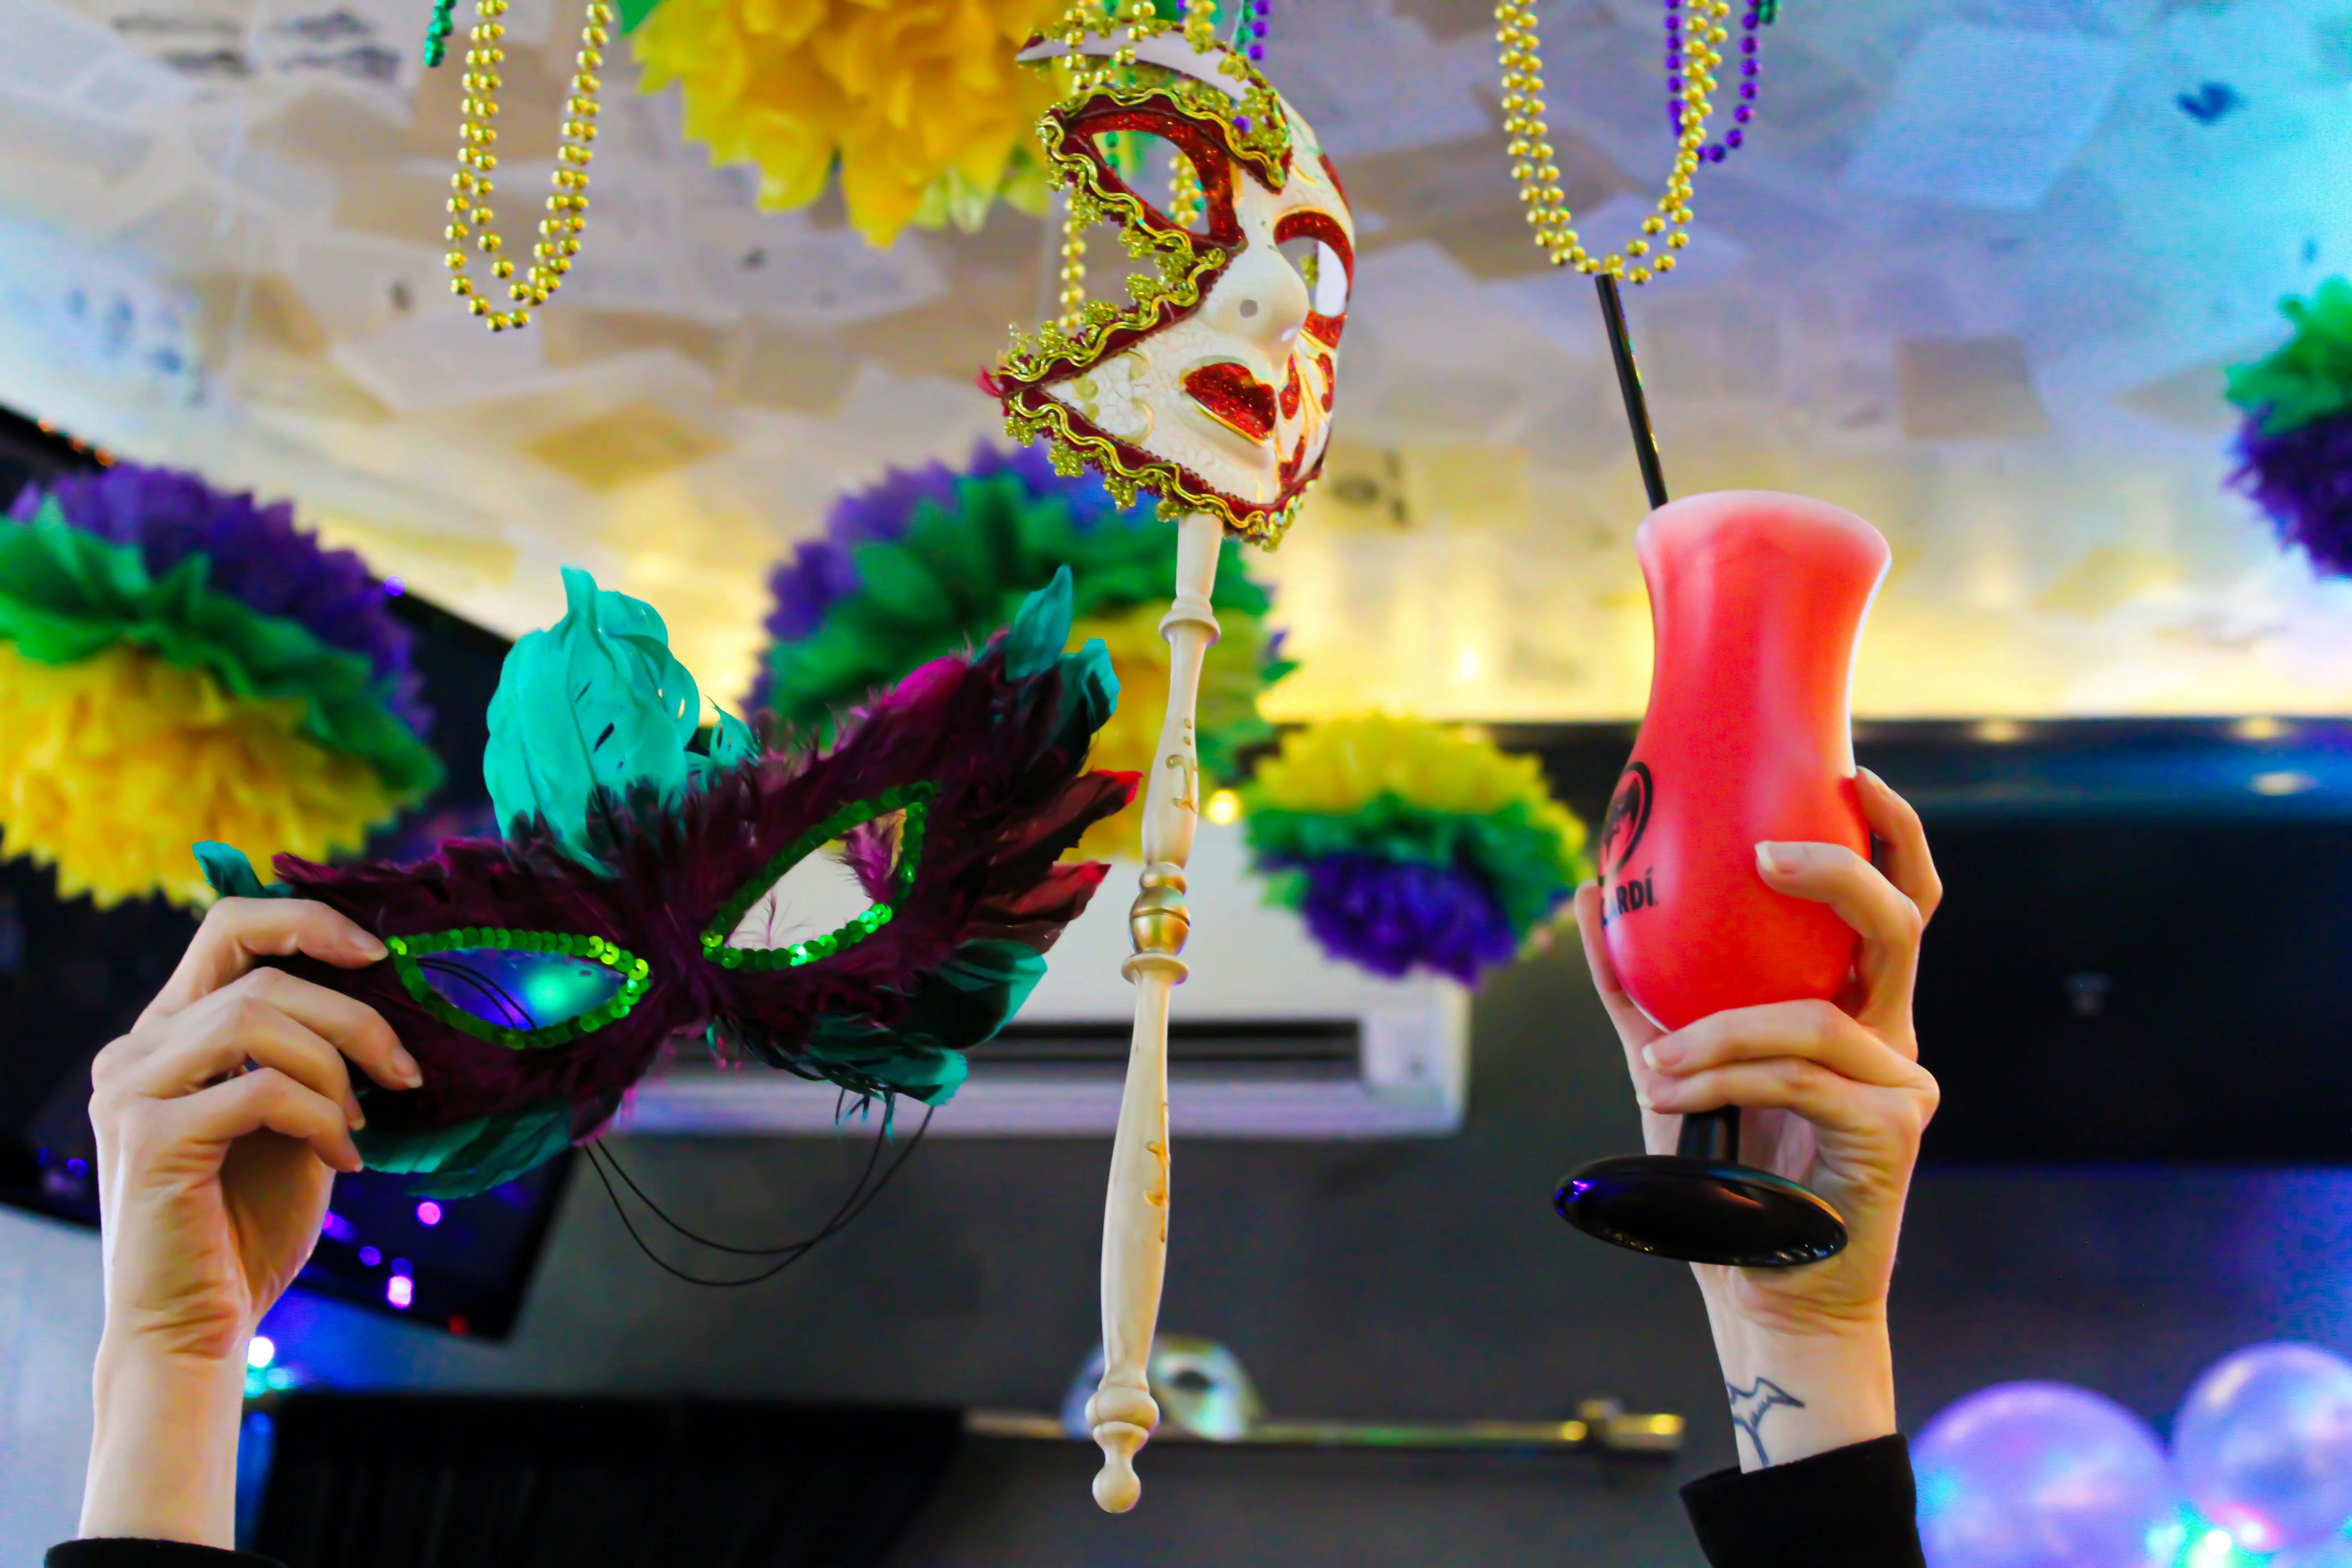 Hands hold a cocktail and mask in the air, with beads in the background